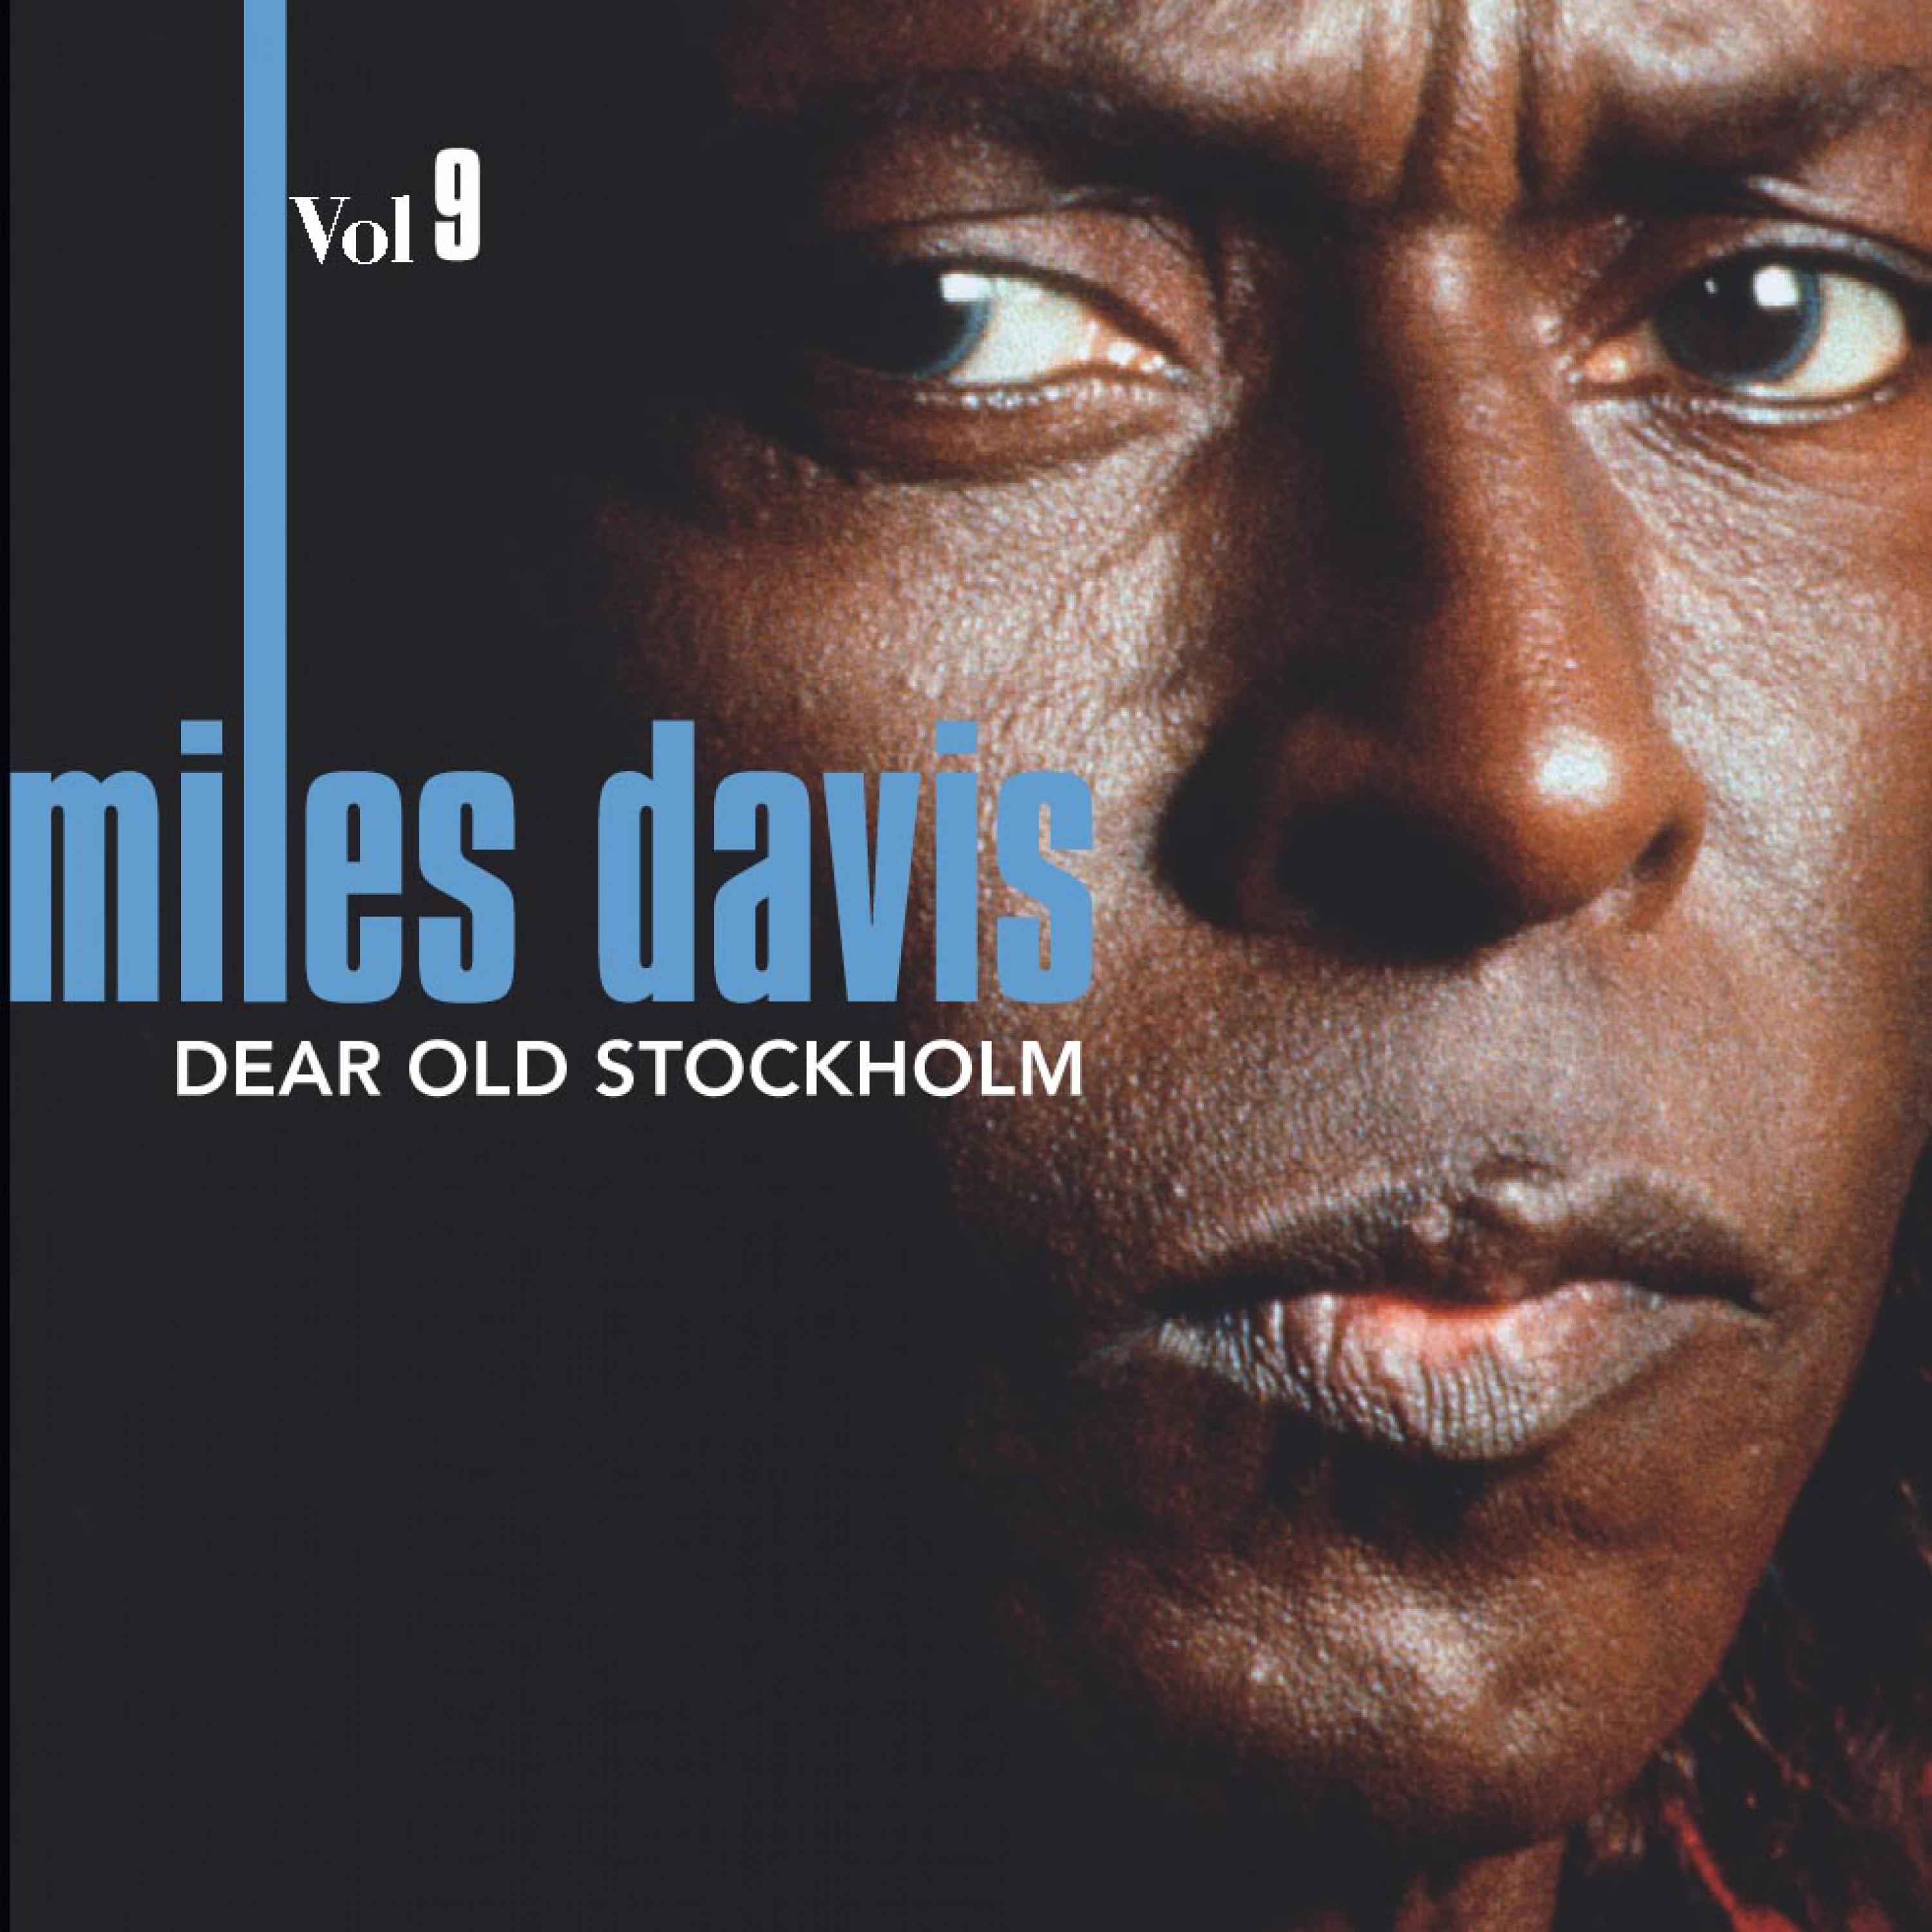 Miles Davis - Out of the Blue Vol. 9